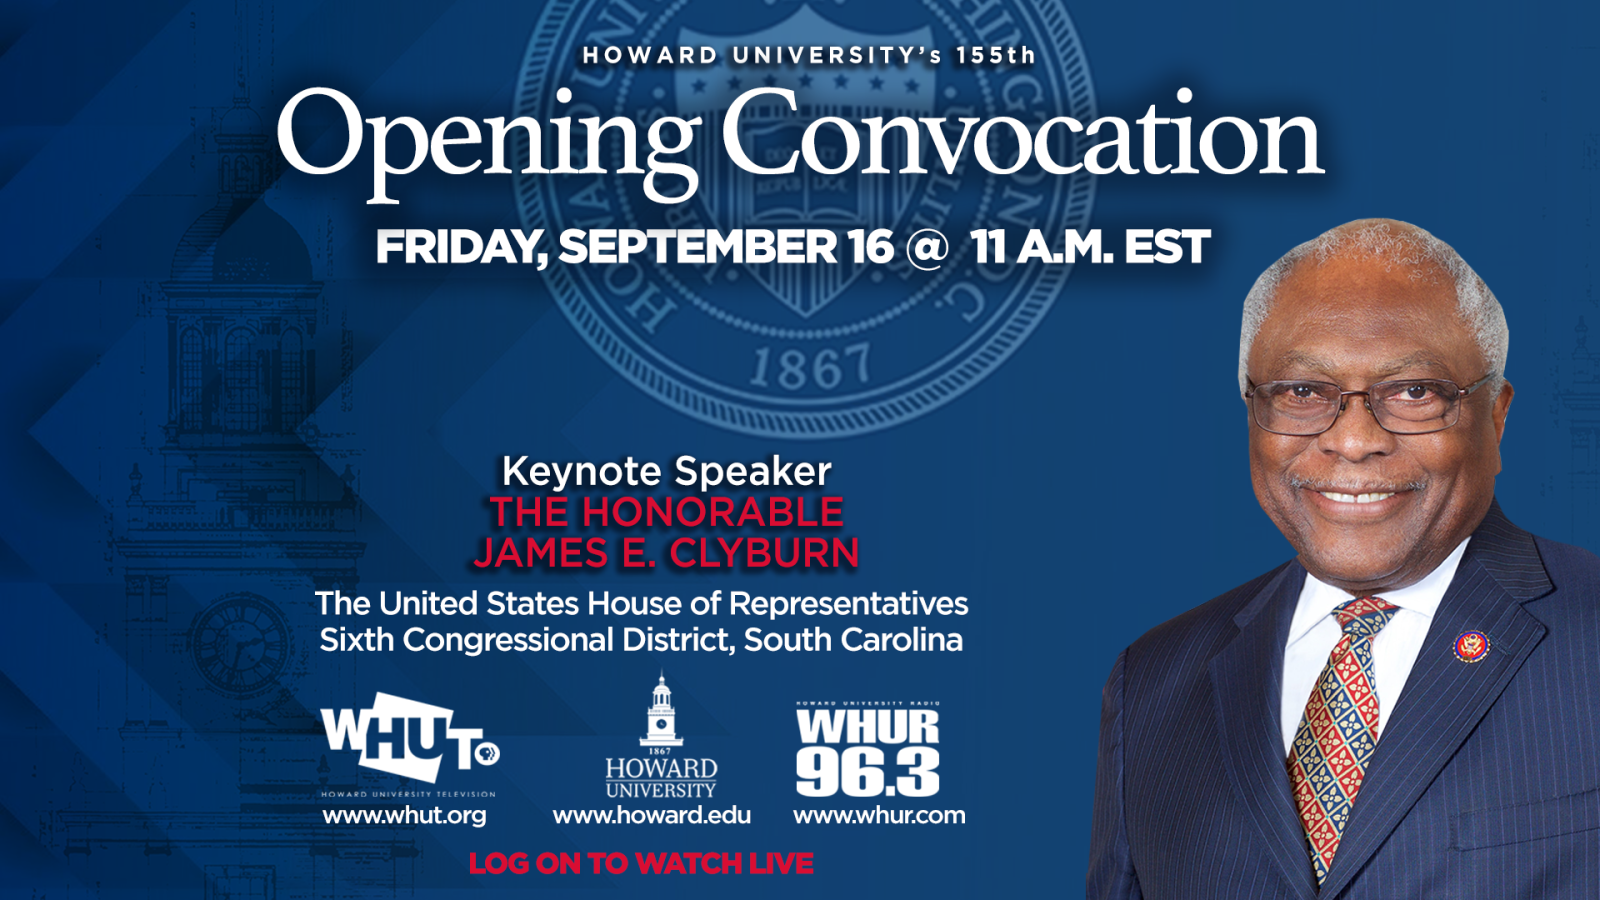 Howard University Opening Convocation 2022 Features James E. Clyburn